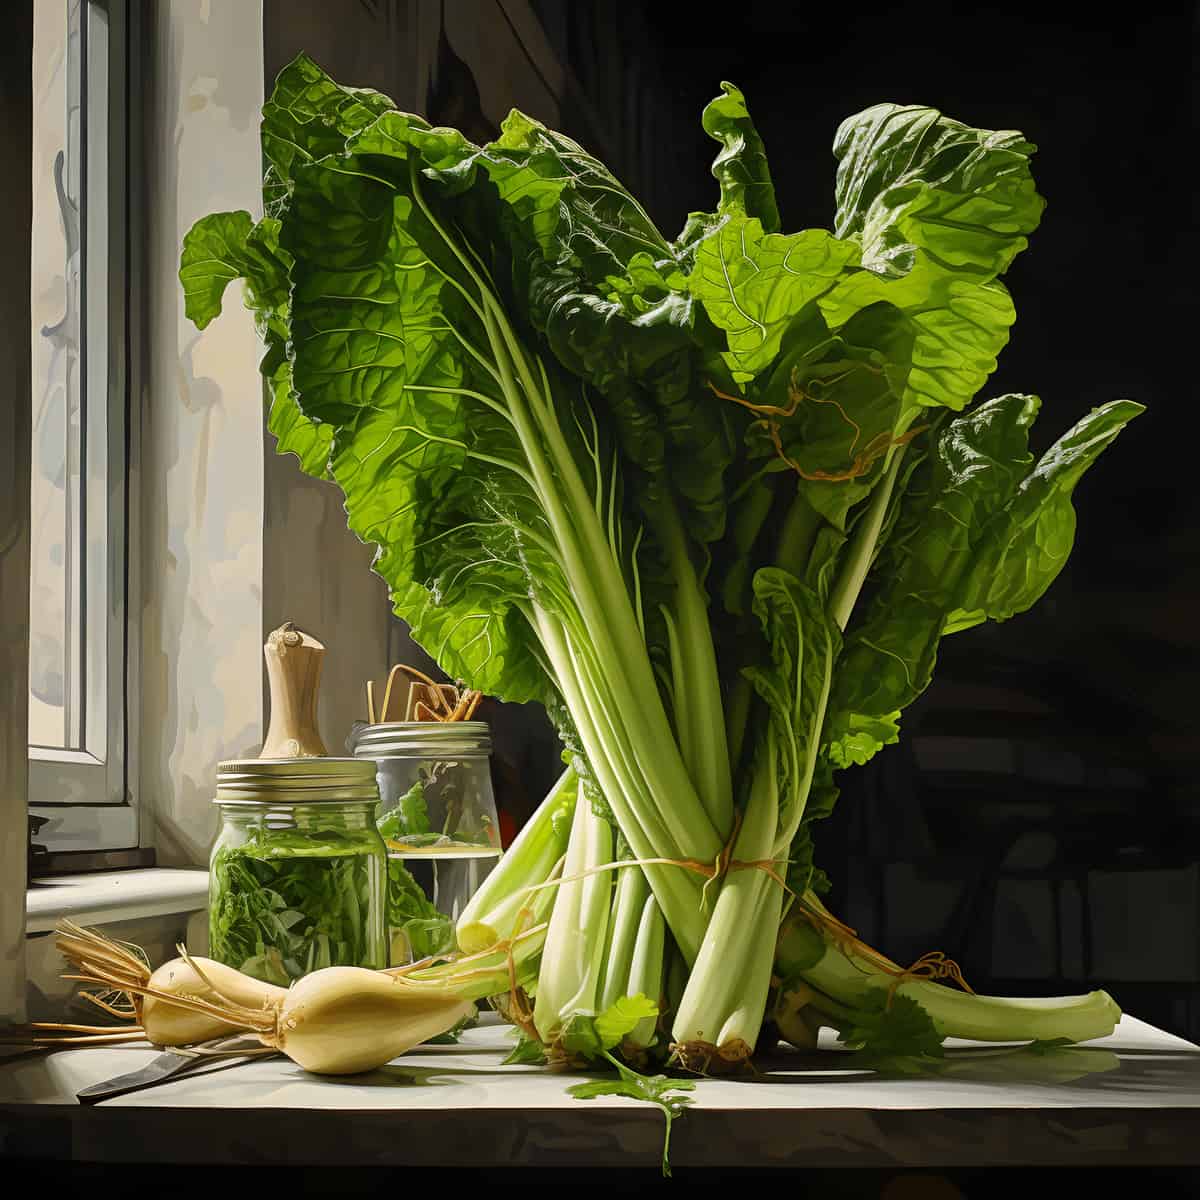 Celtuce on a kitchen counter